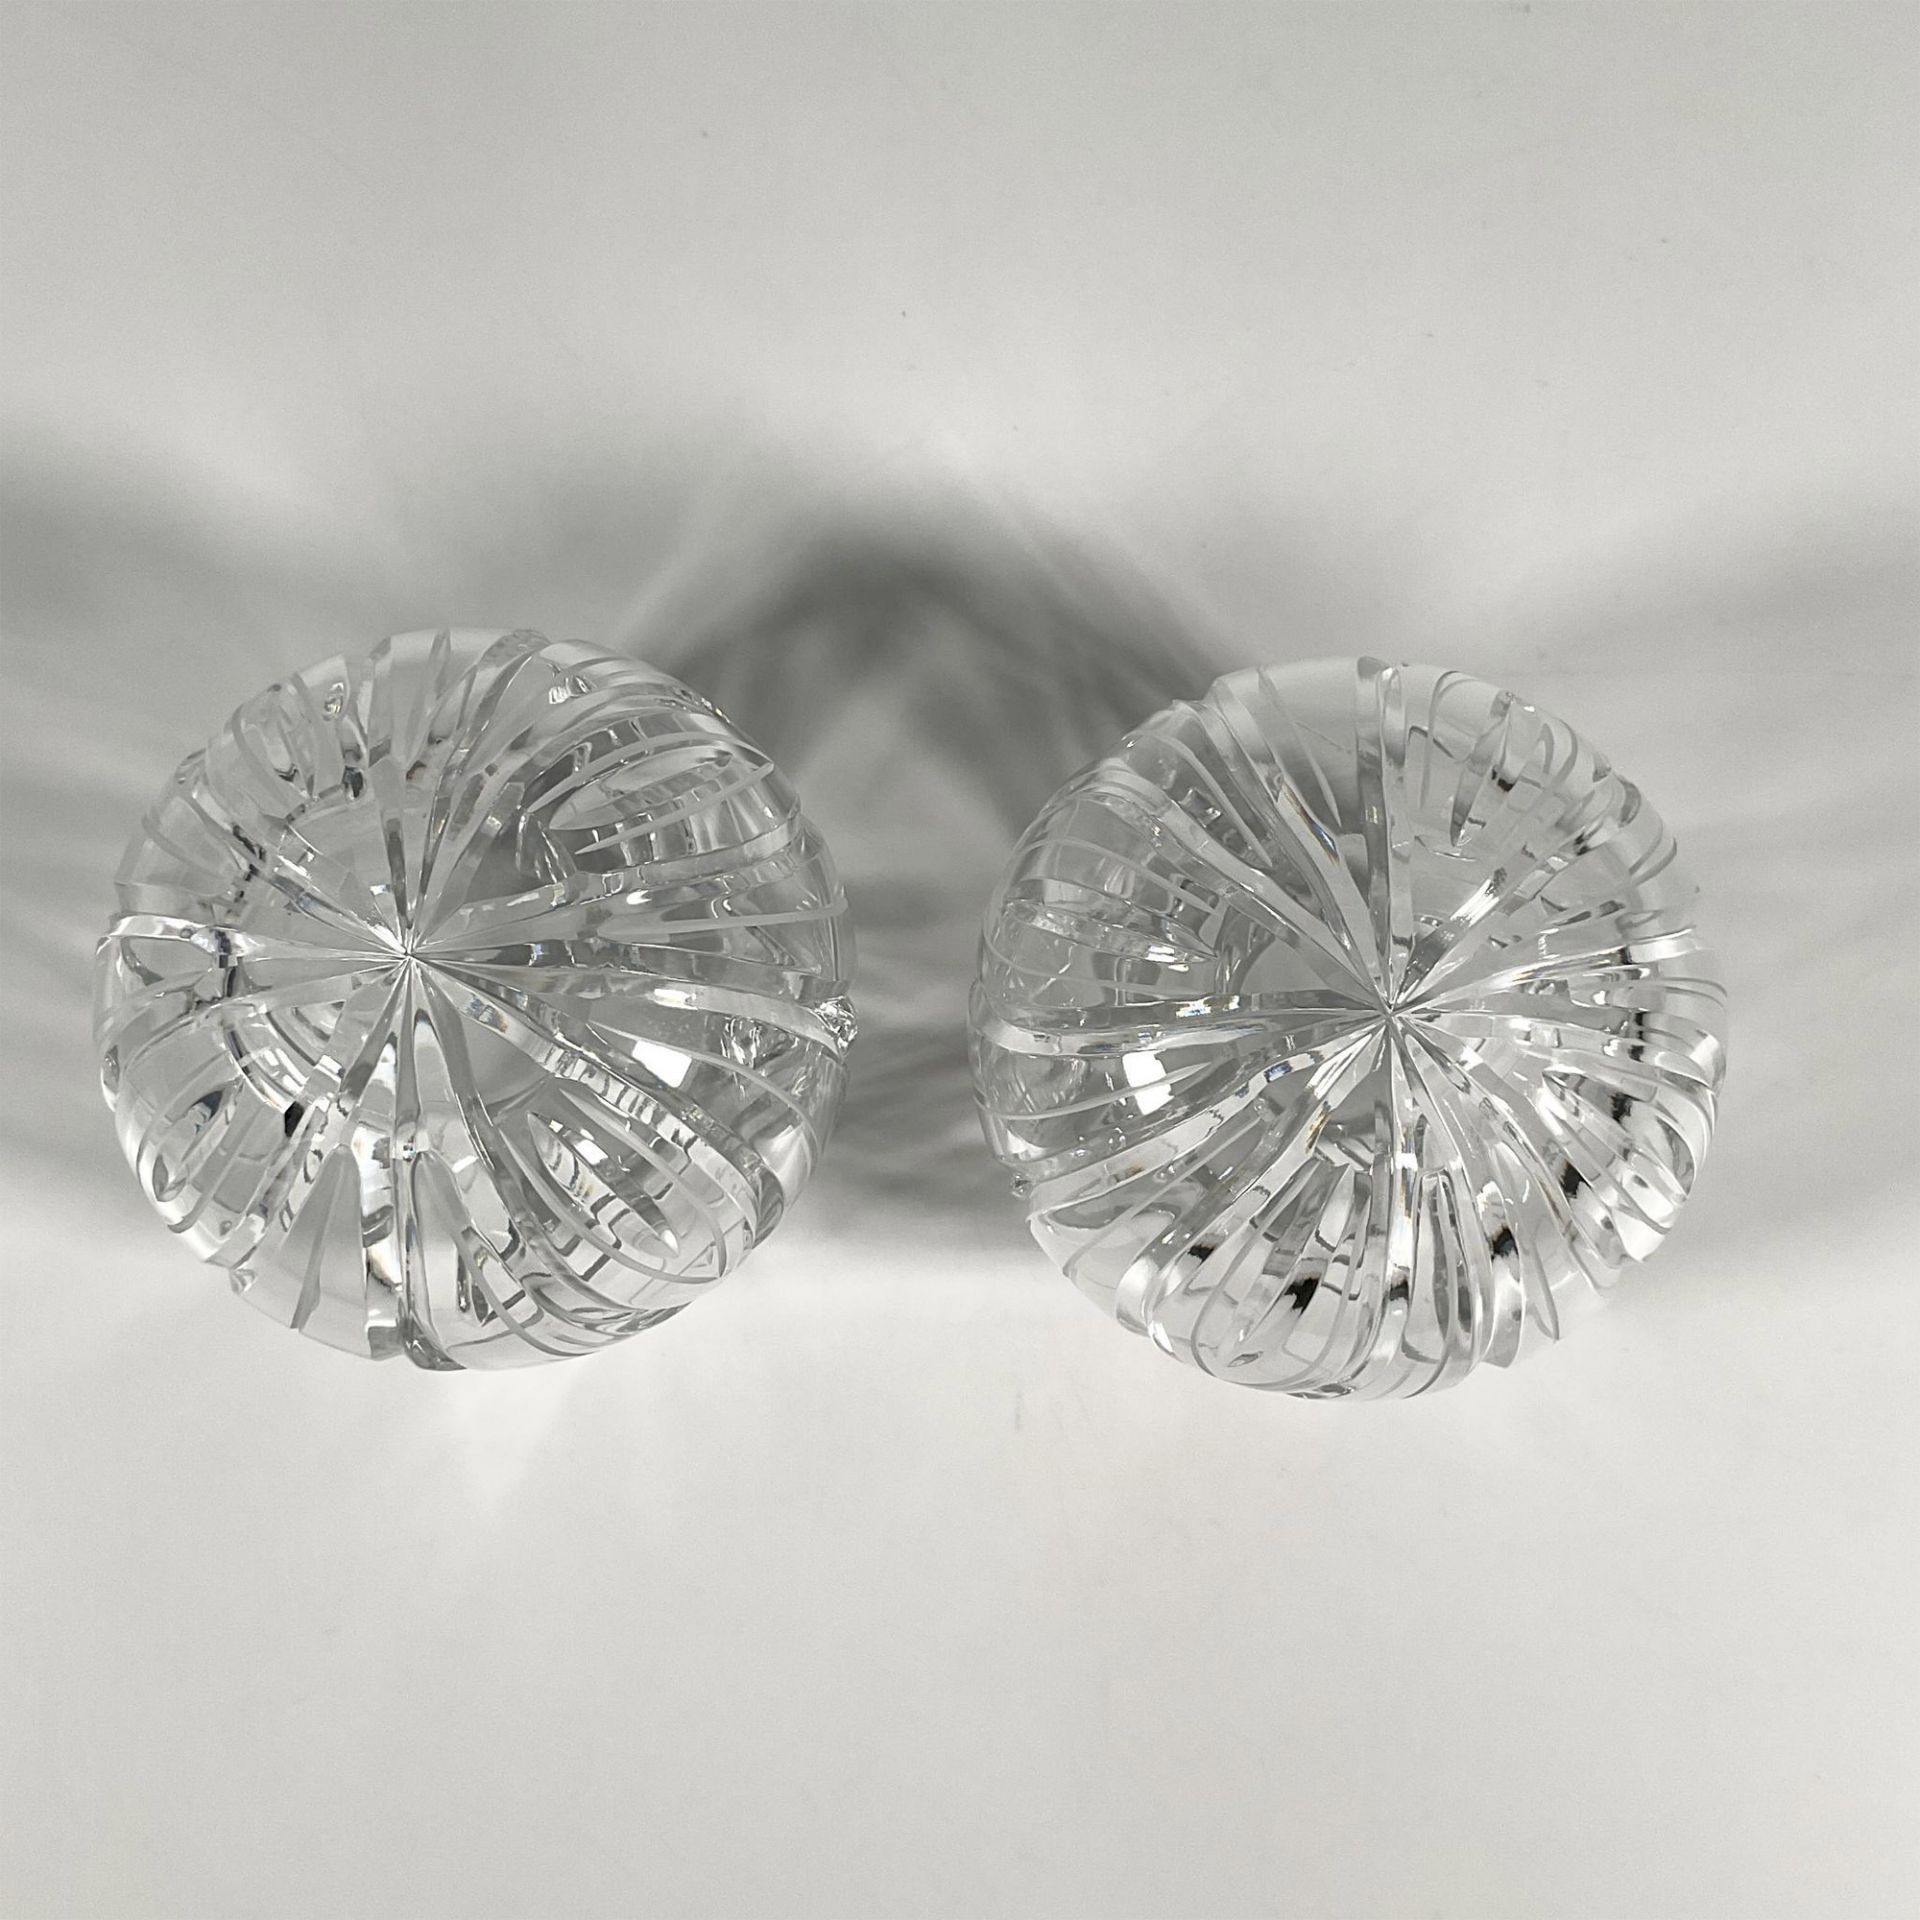 2pc Cut Crystal Vases - Image 3 of 3